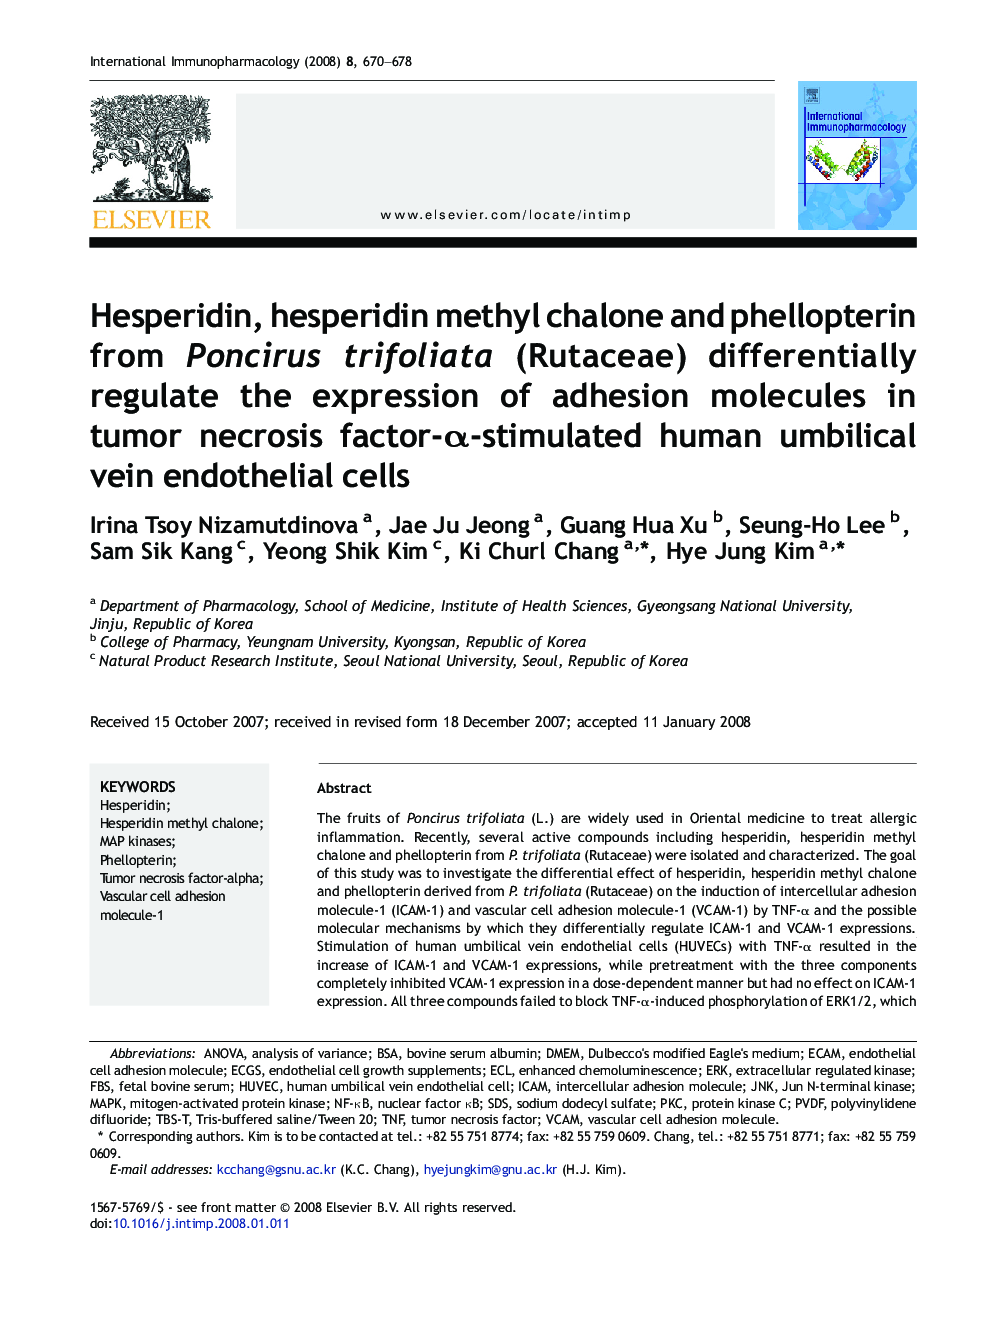 Hesperidin, hesperidin methyl chalone and phellopterin from Poncirus trifoliata (Rutaceae) differentially regulate the expression of adhesion molecules in tumor necrosis factor-α-stimulated human umbilical vein endothelial cells